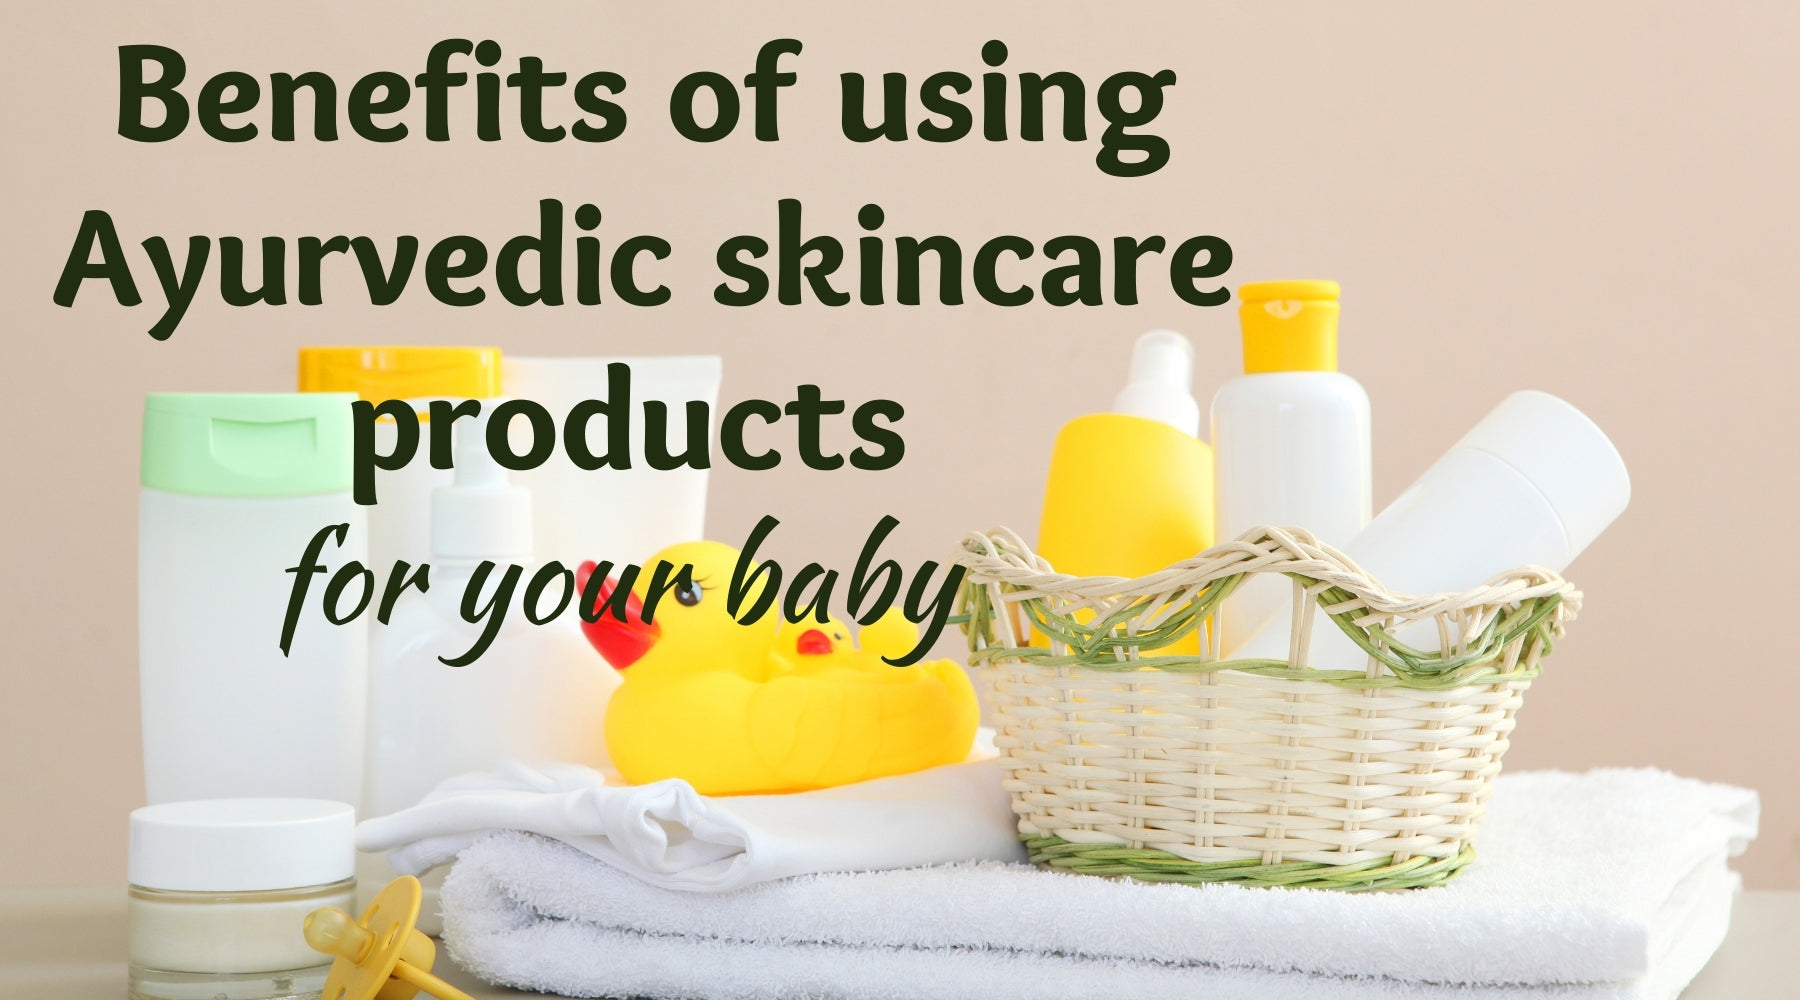 Benefits of using Ayurvedic skincare products for your baby